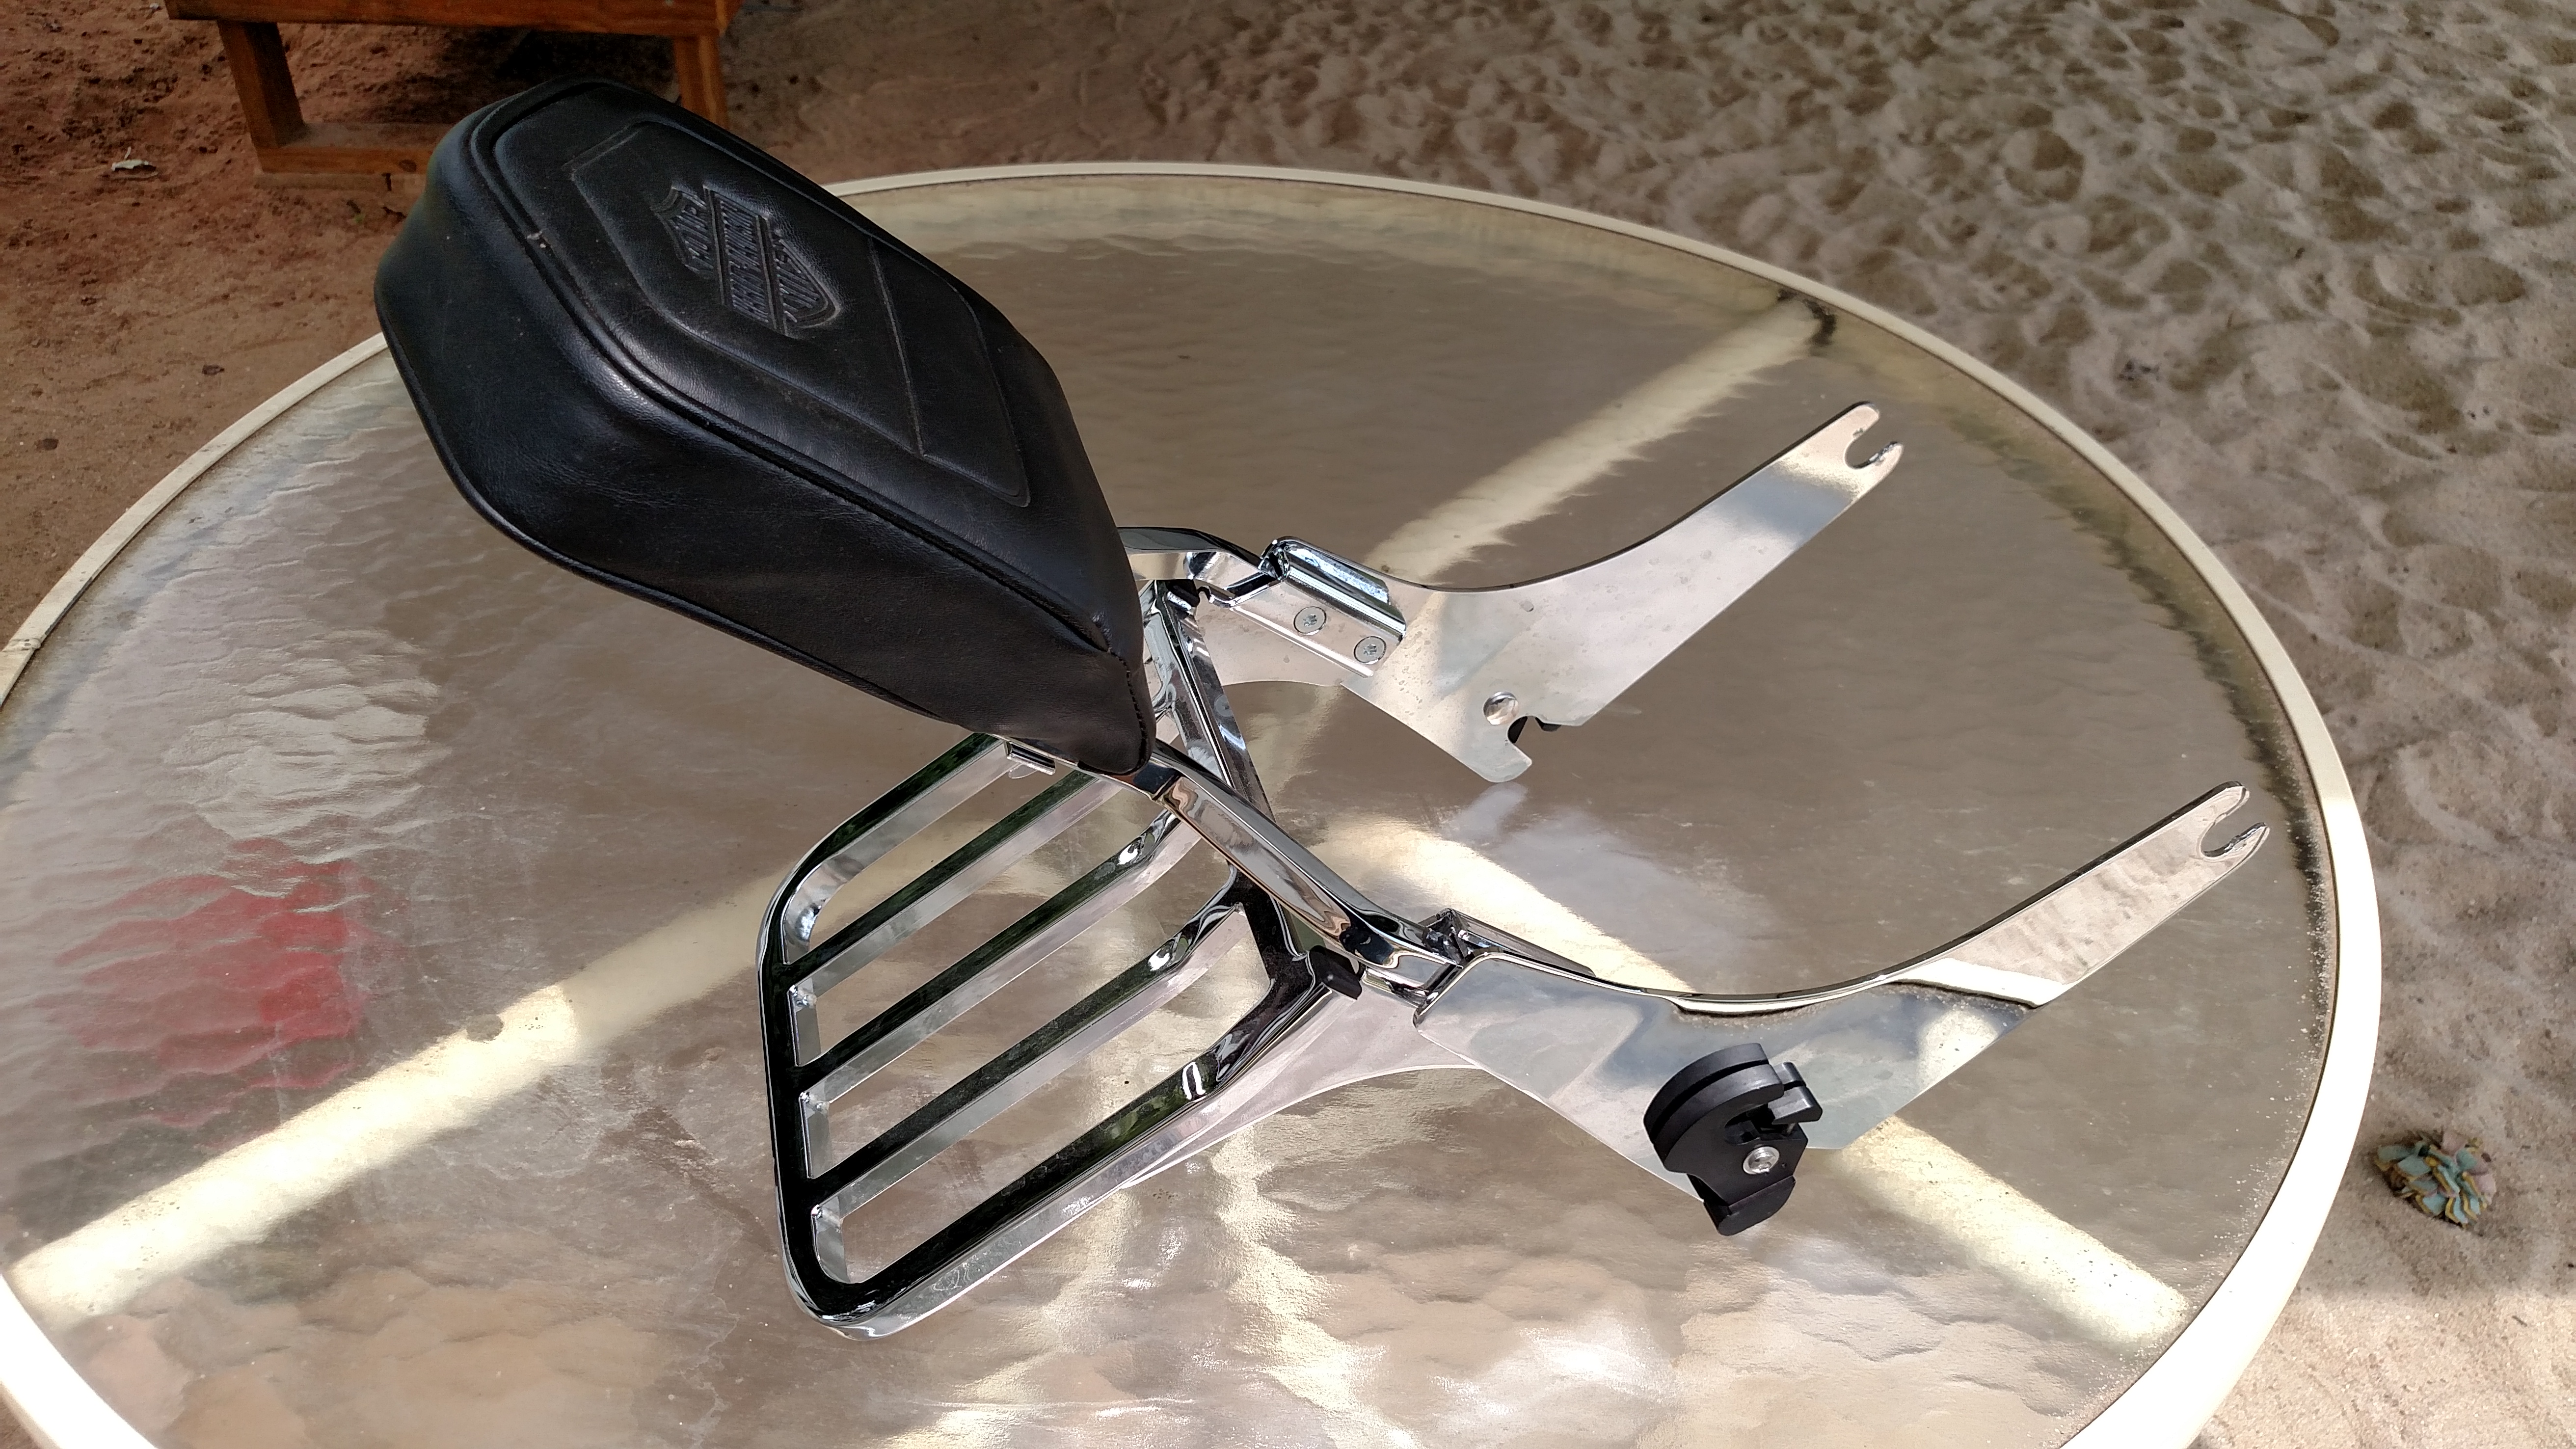 2012 Switchback Removable Sissy bar with luggage rack - Harley Davidson Forums